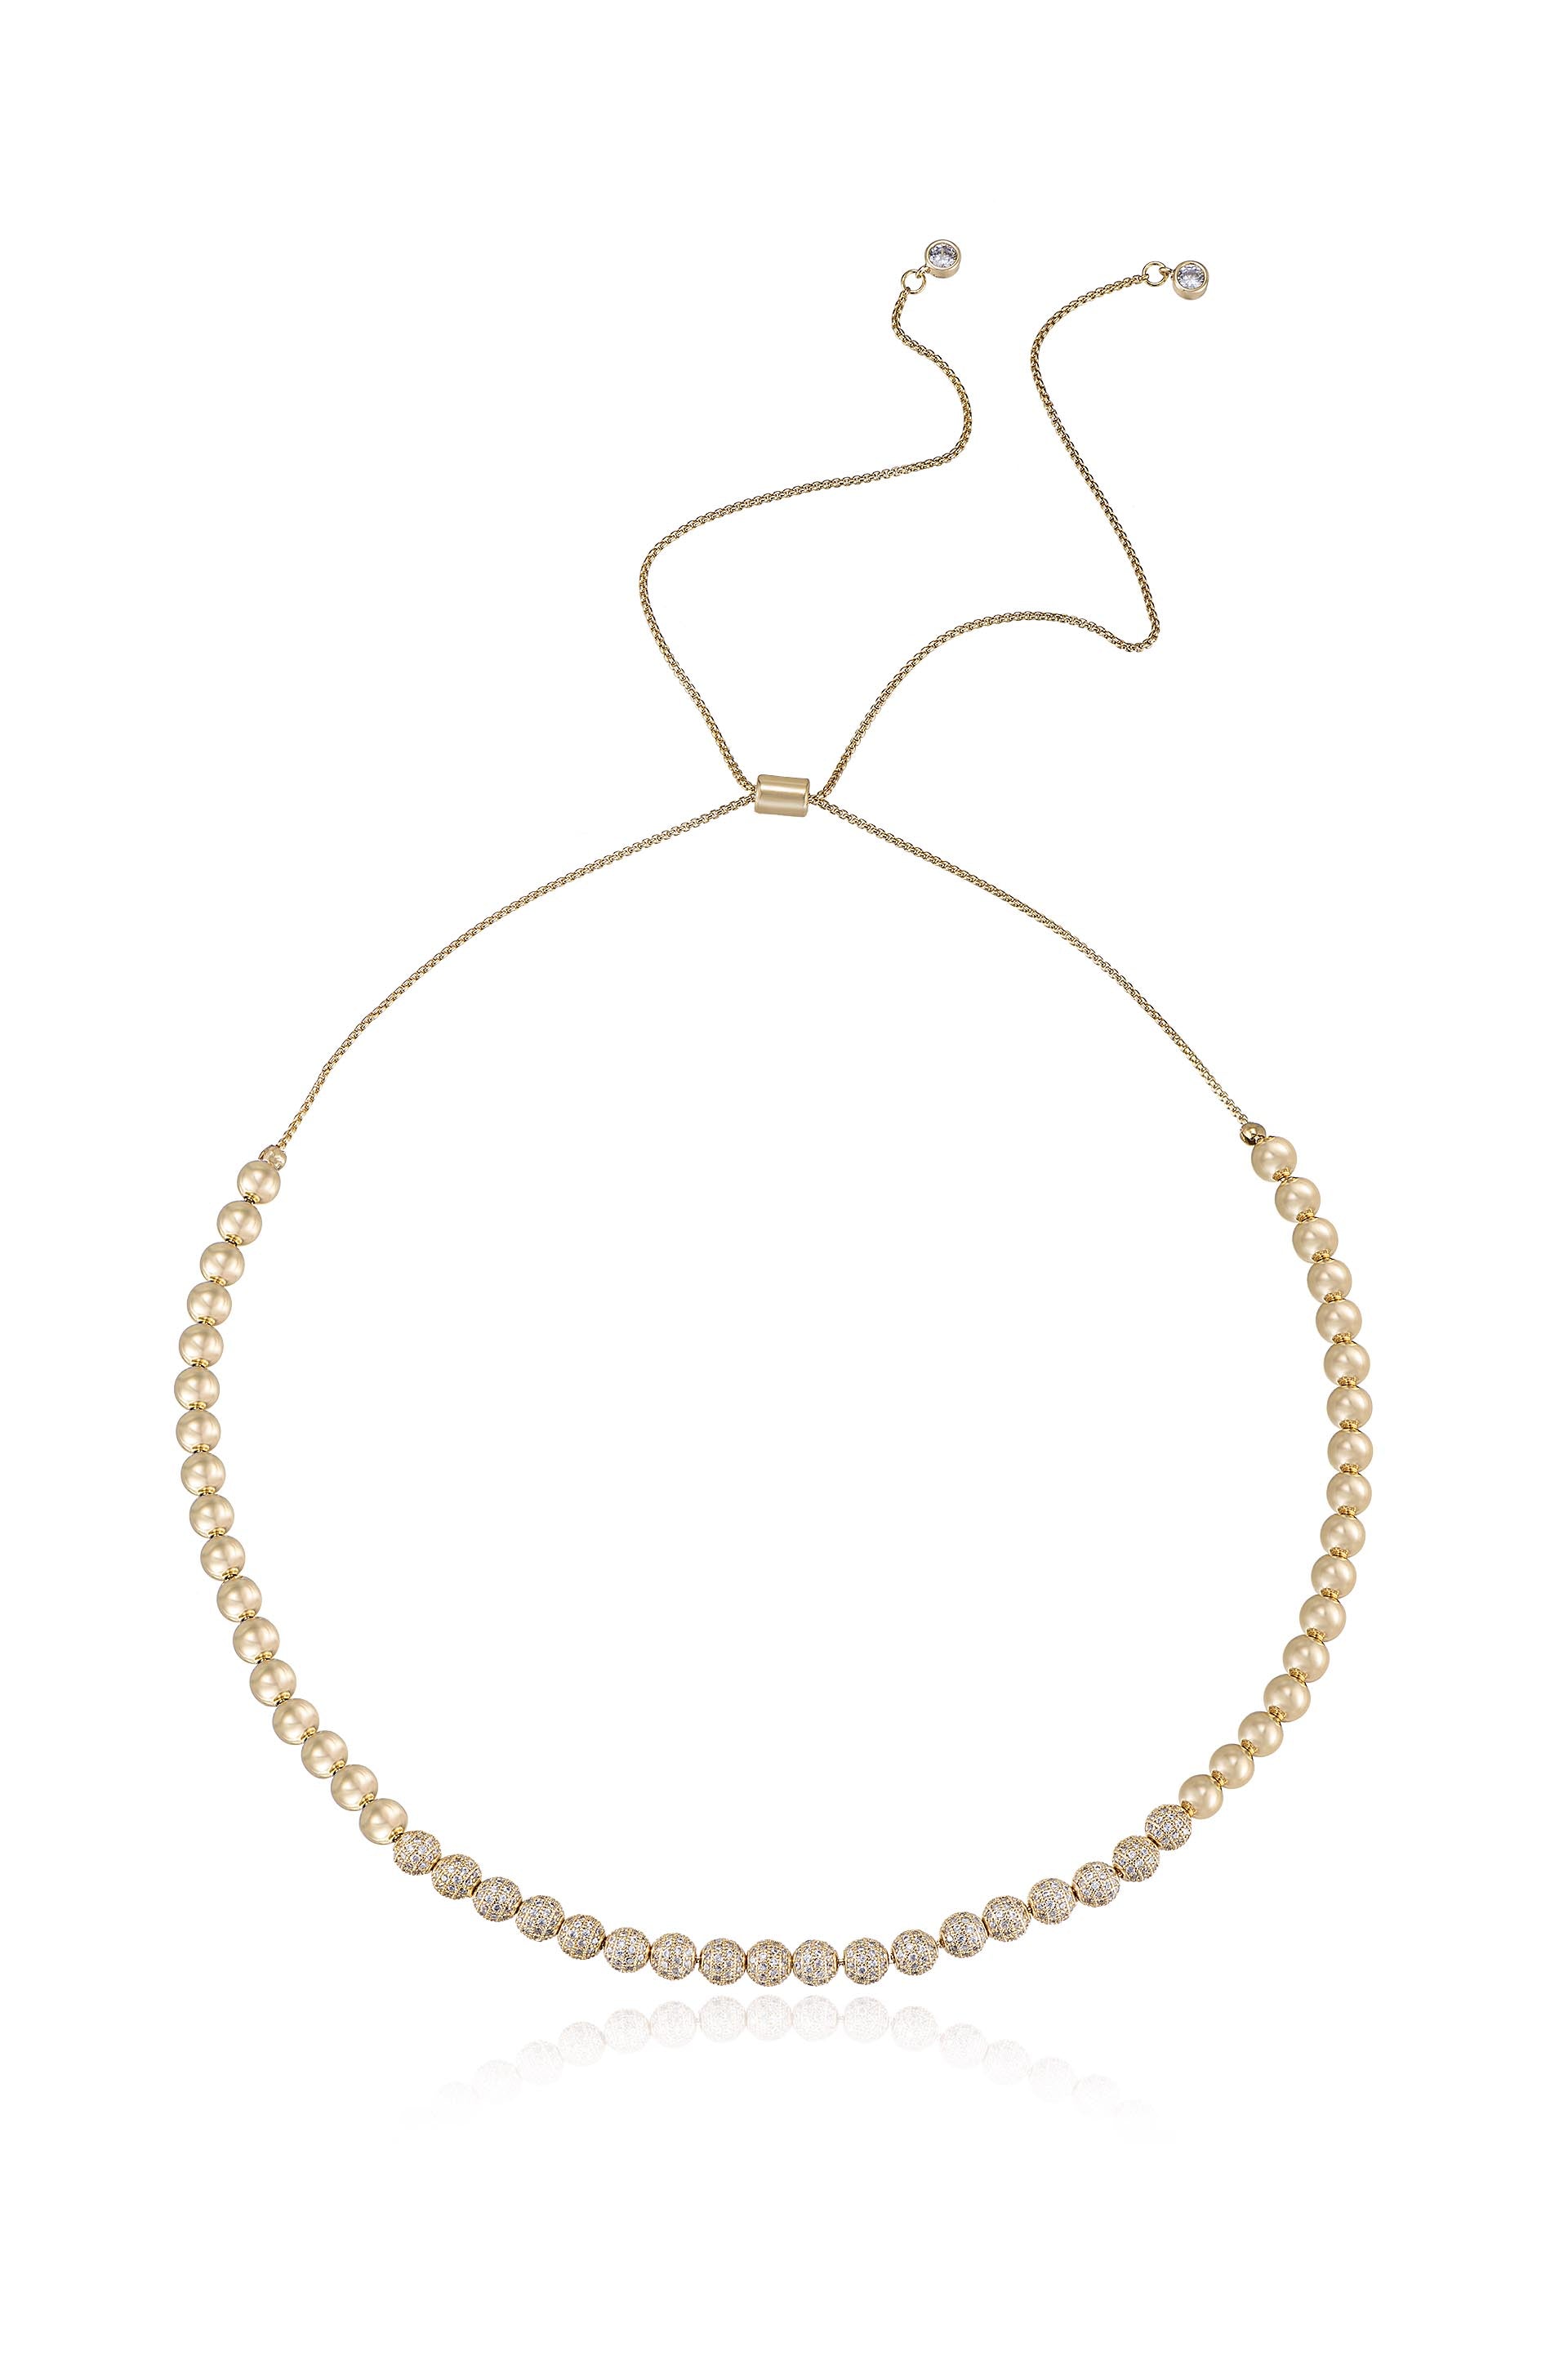 Show Yourself 18k Gold Plated and Crystal Bead Necklace